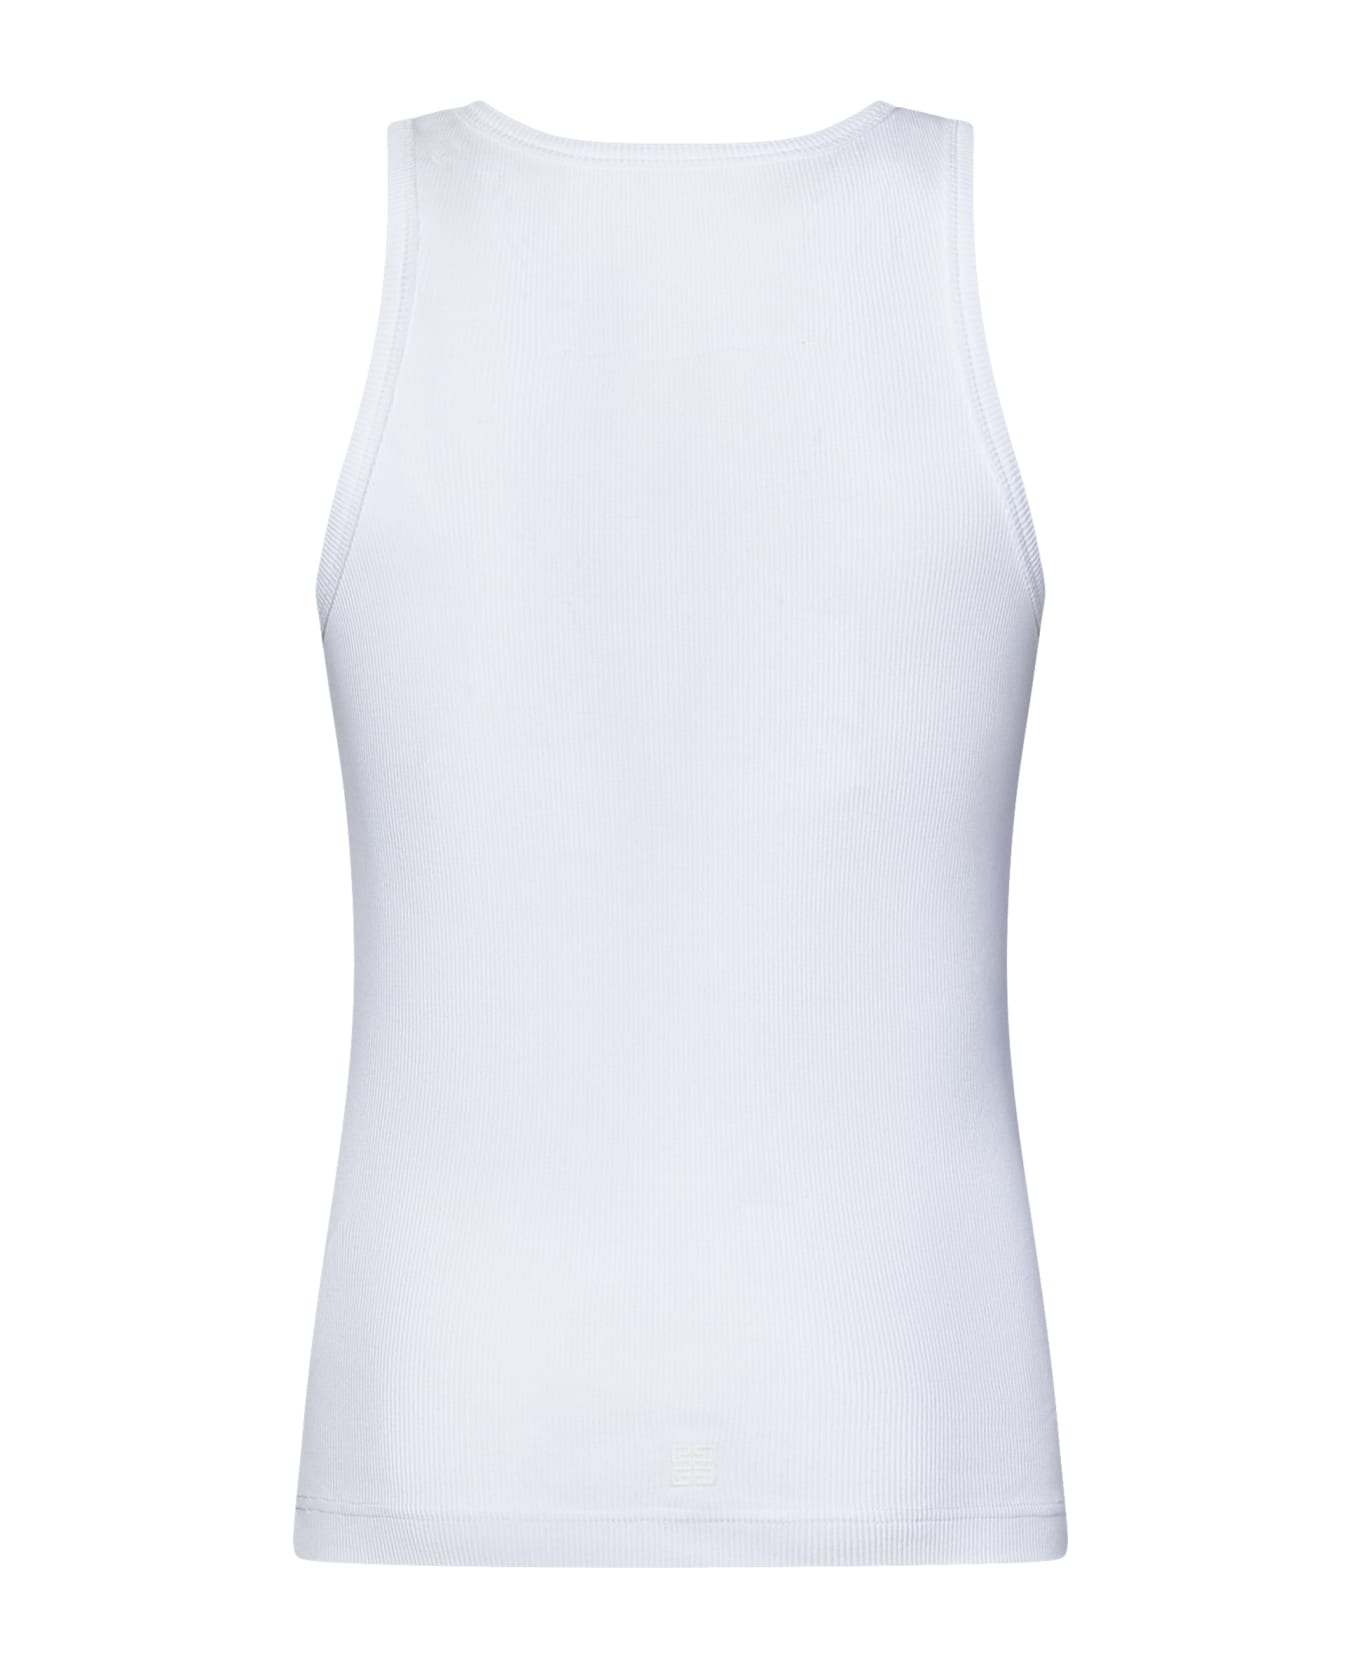 Givenchy Top - White タンクトップ